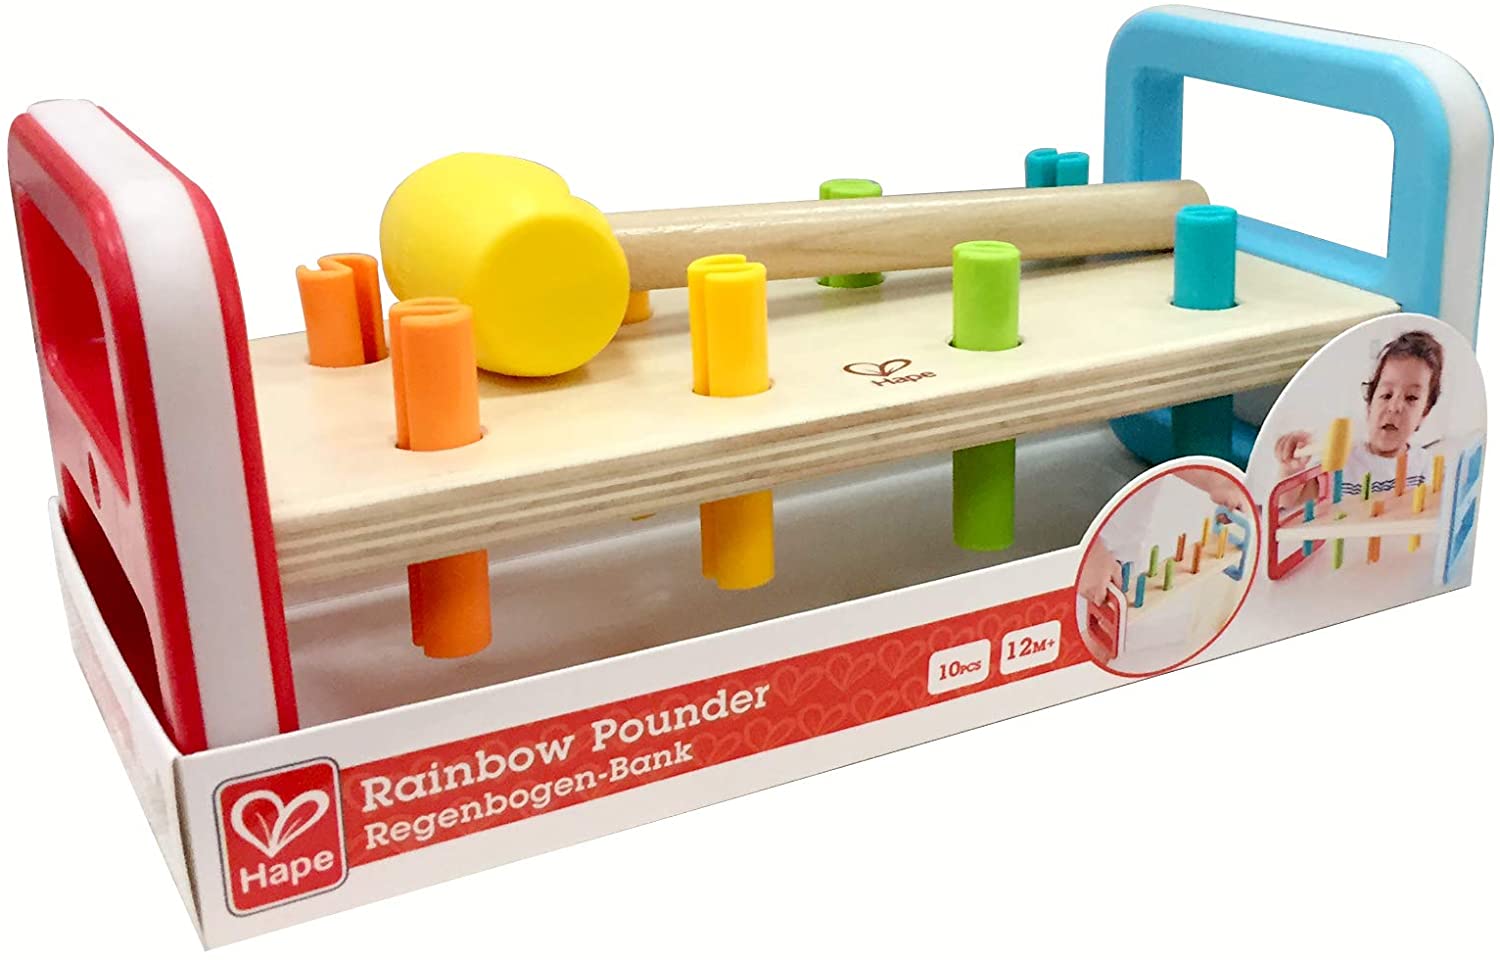 (OPEN BOX)  Hape Rainbow Pounder| Pounding Bench Wooden Toy with Hammer Blue, Red, Orange, Green, Yellow, Wood, L: 9.1, W: 4, H: 4.2 inch